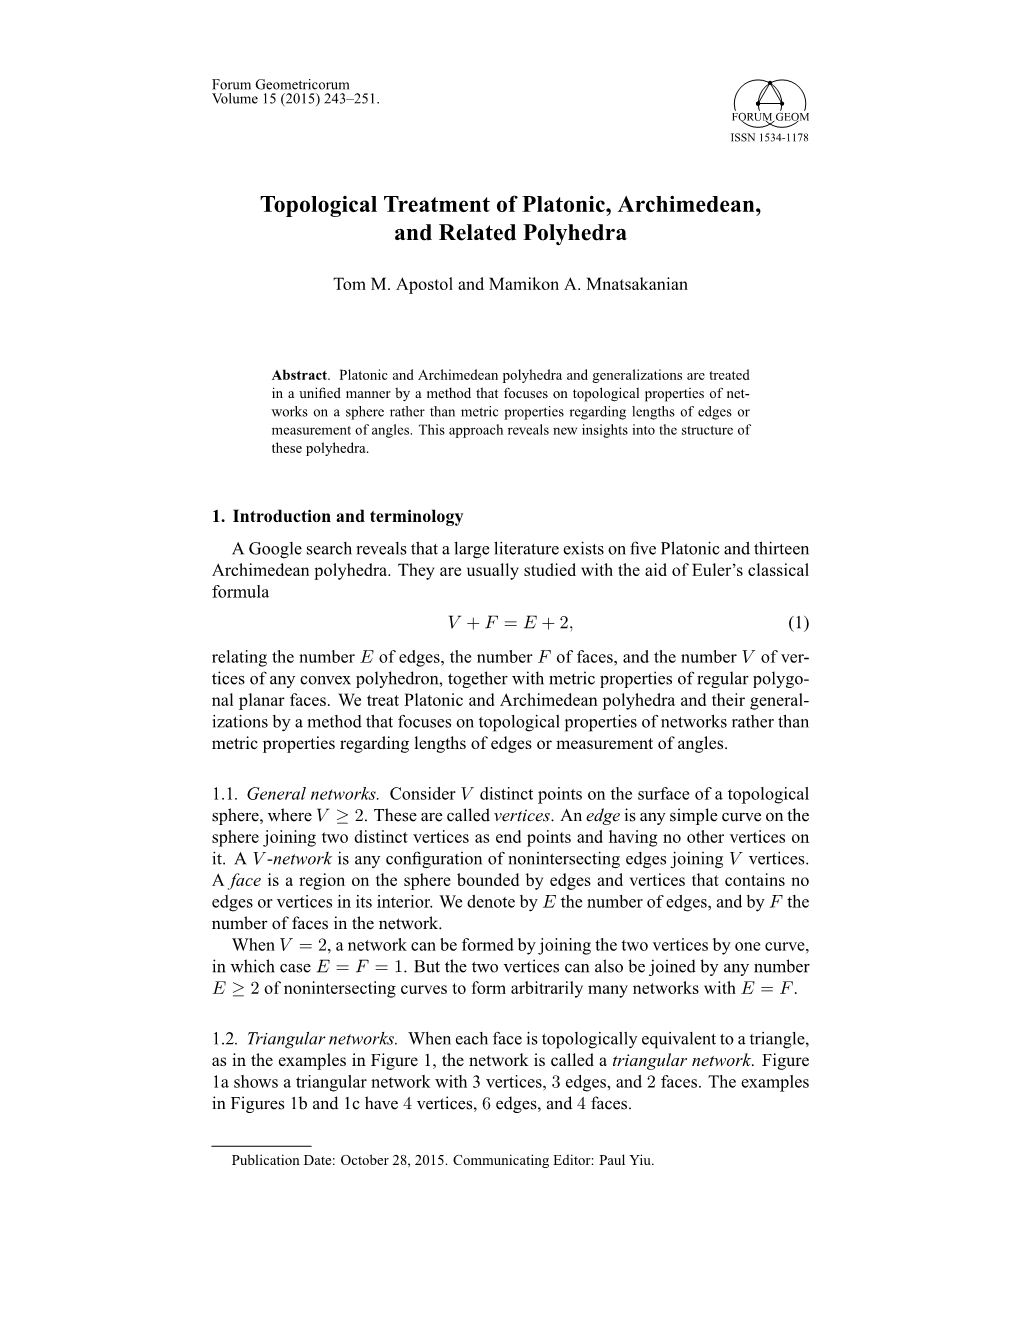 Topological Treatment of Platonic, Archimedean, and Related Polyhedra